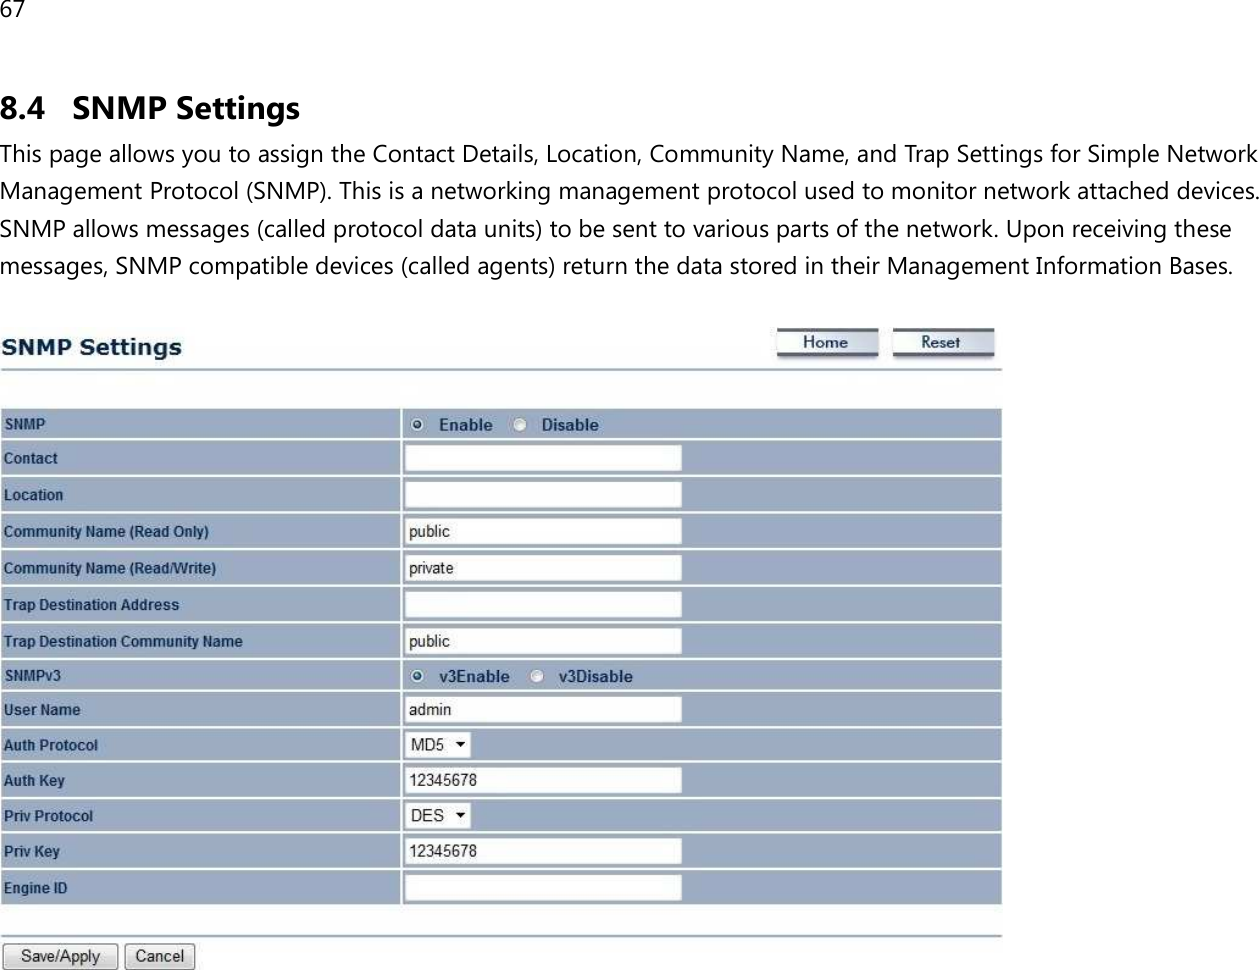 67  8.4 SNMP Settings This page allows you to assign the Contact Details, Location, Community Name, and Trap Settings for Simple Network Management Protocol (SNMP). This is a networking management protocol used to monitor network attached devices. SNMP allows messages (called protocol data units) to be sent to various parts of the network. Upon receiving these messages, SNMP compatible devices (called agents) return the data stored in their Management Information Bases.     